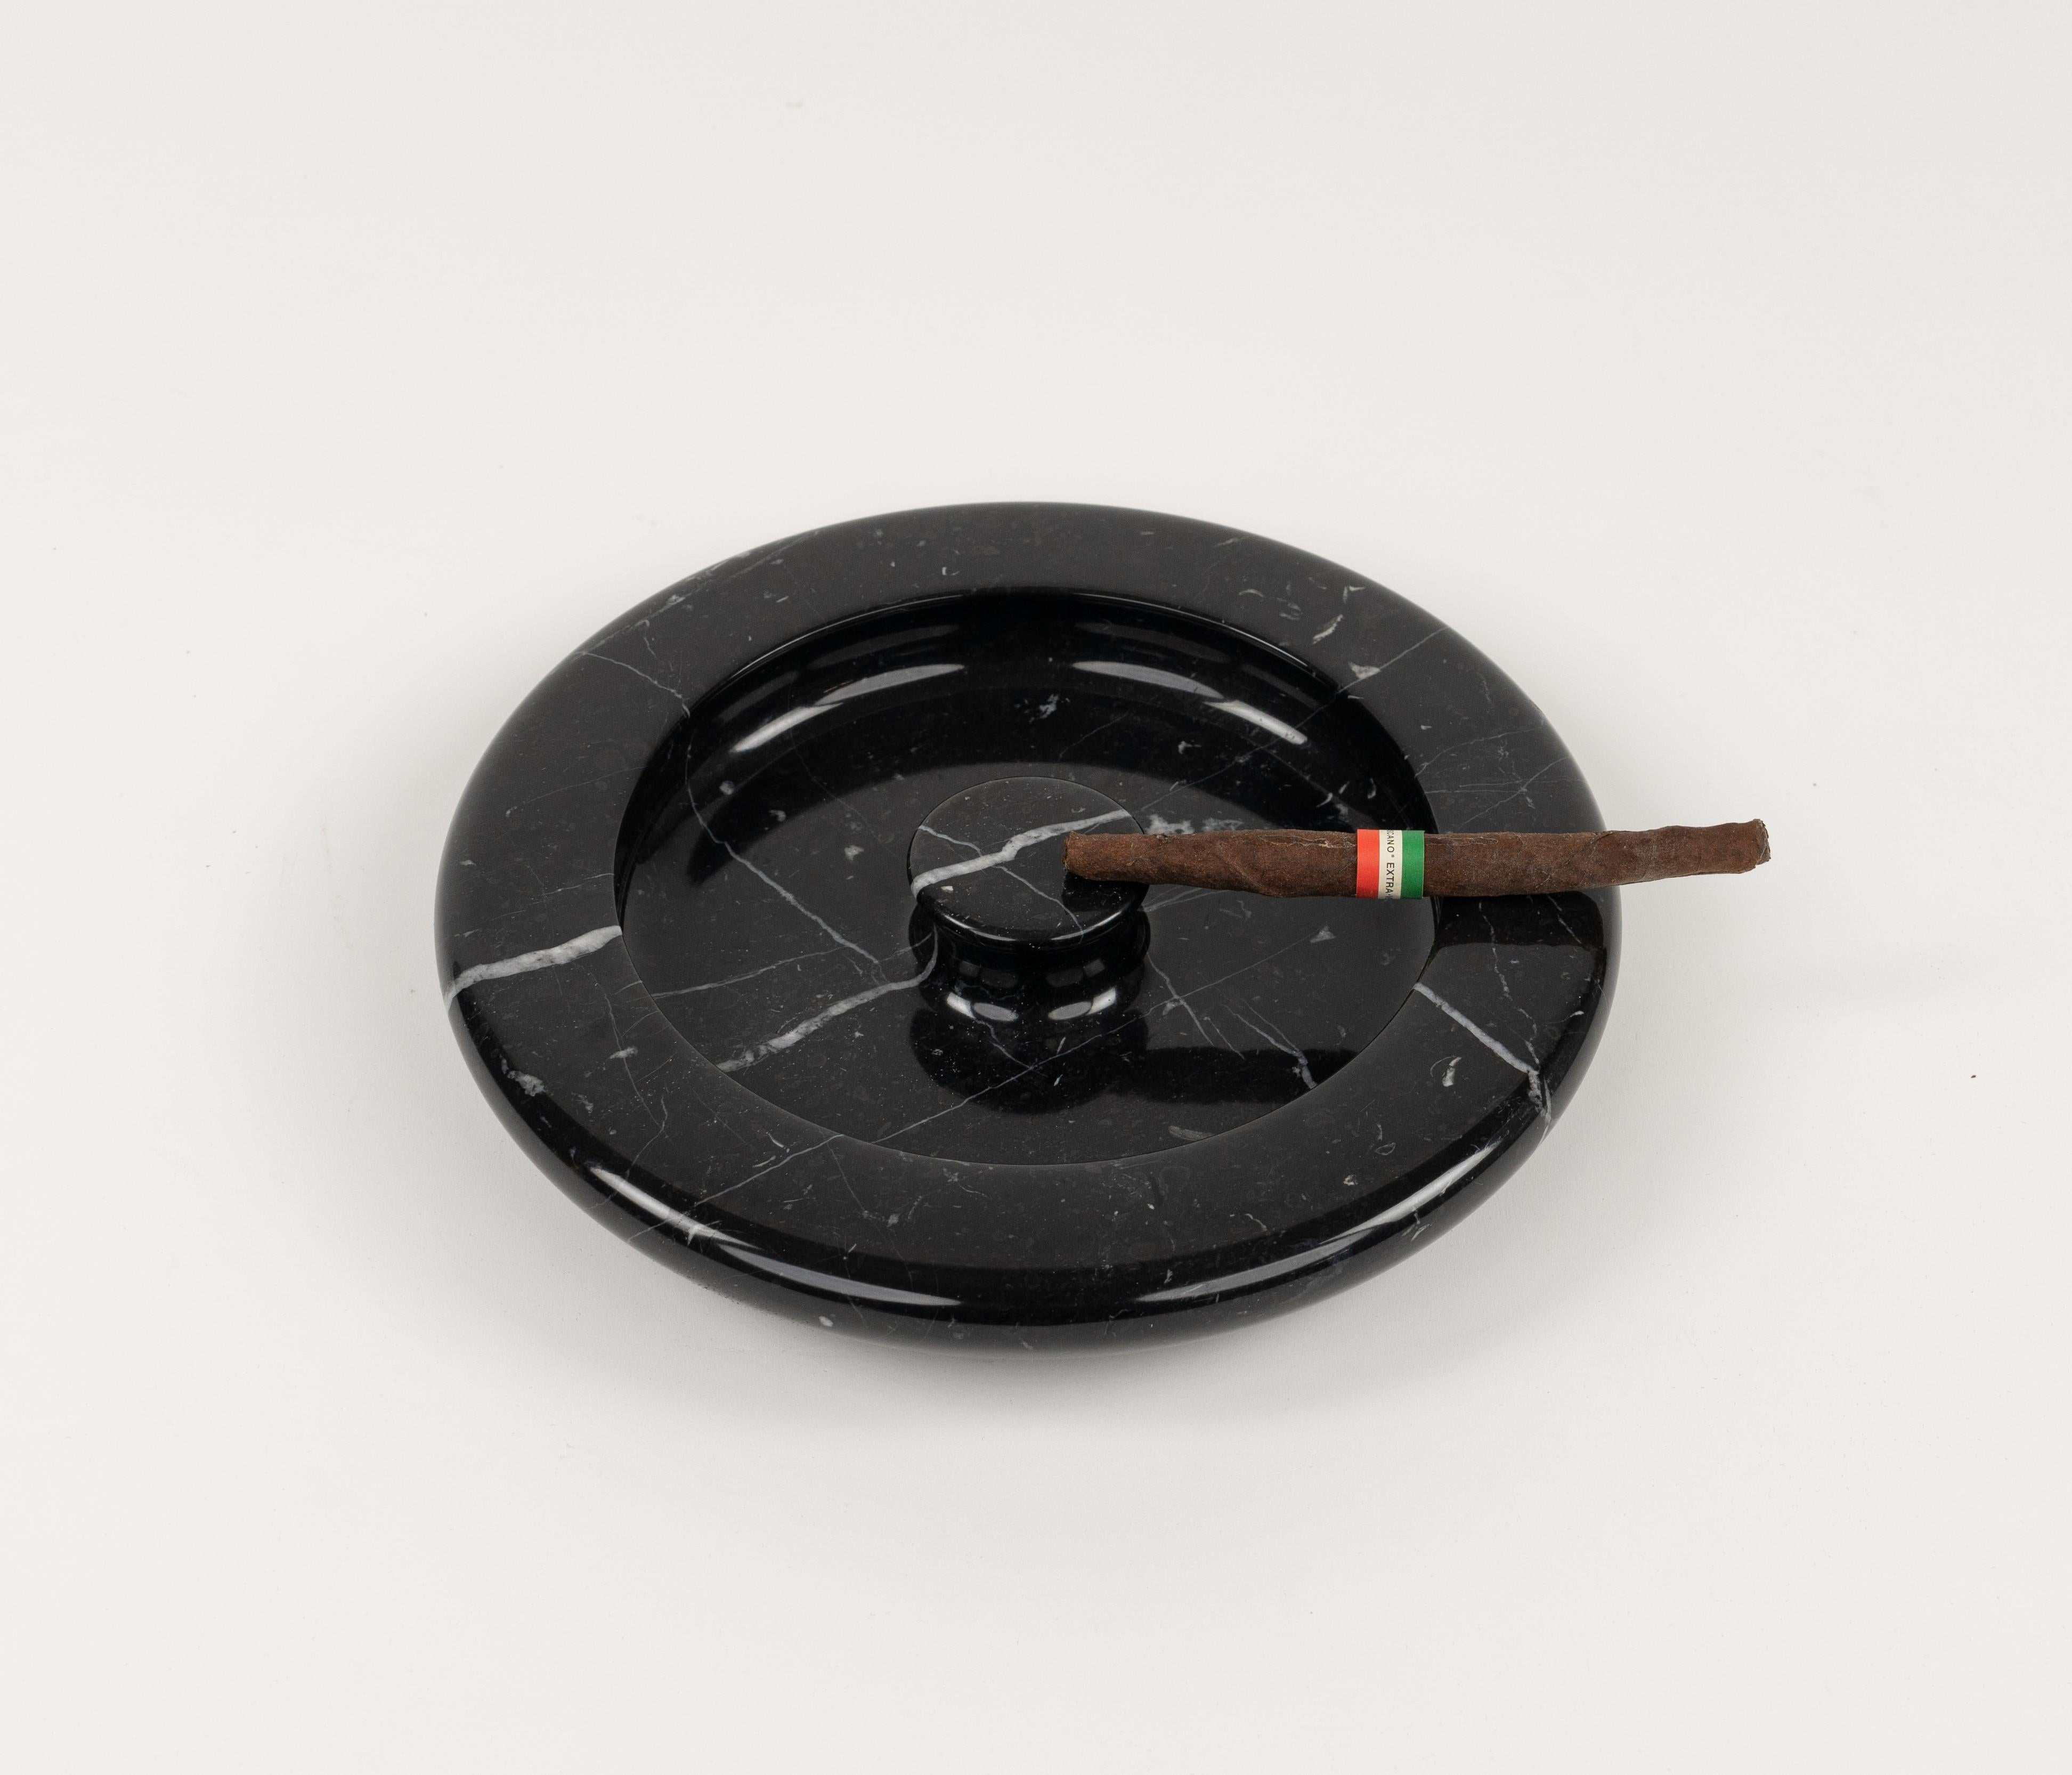 Black Marble Ashtray or Vide-Poche attributed to Angelo Mangiarotti, Italy 1970s For Sale 3